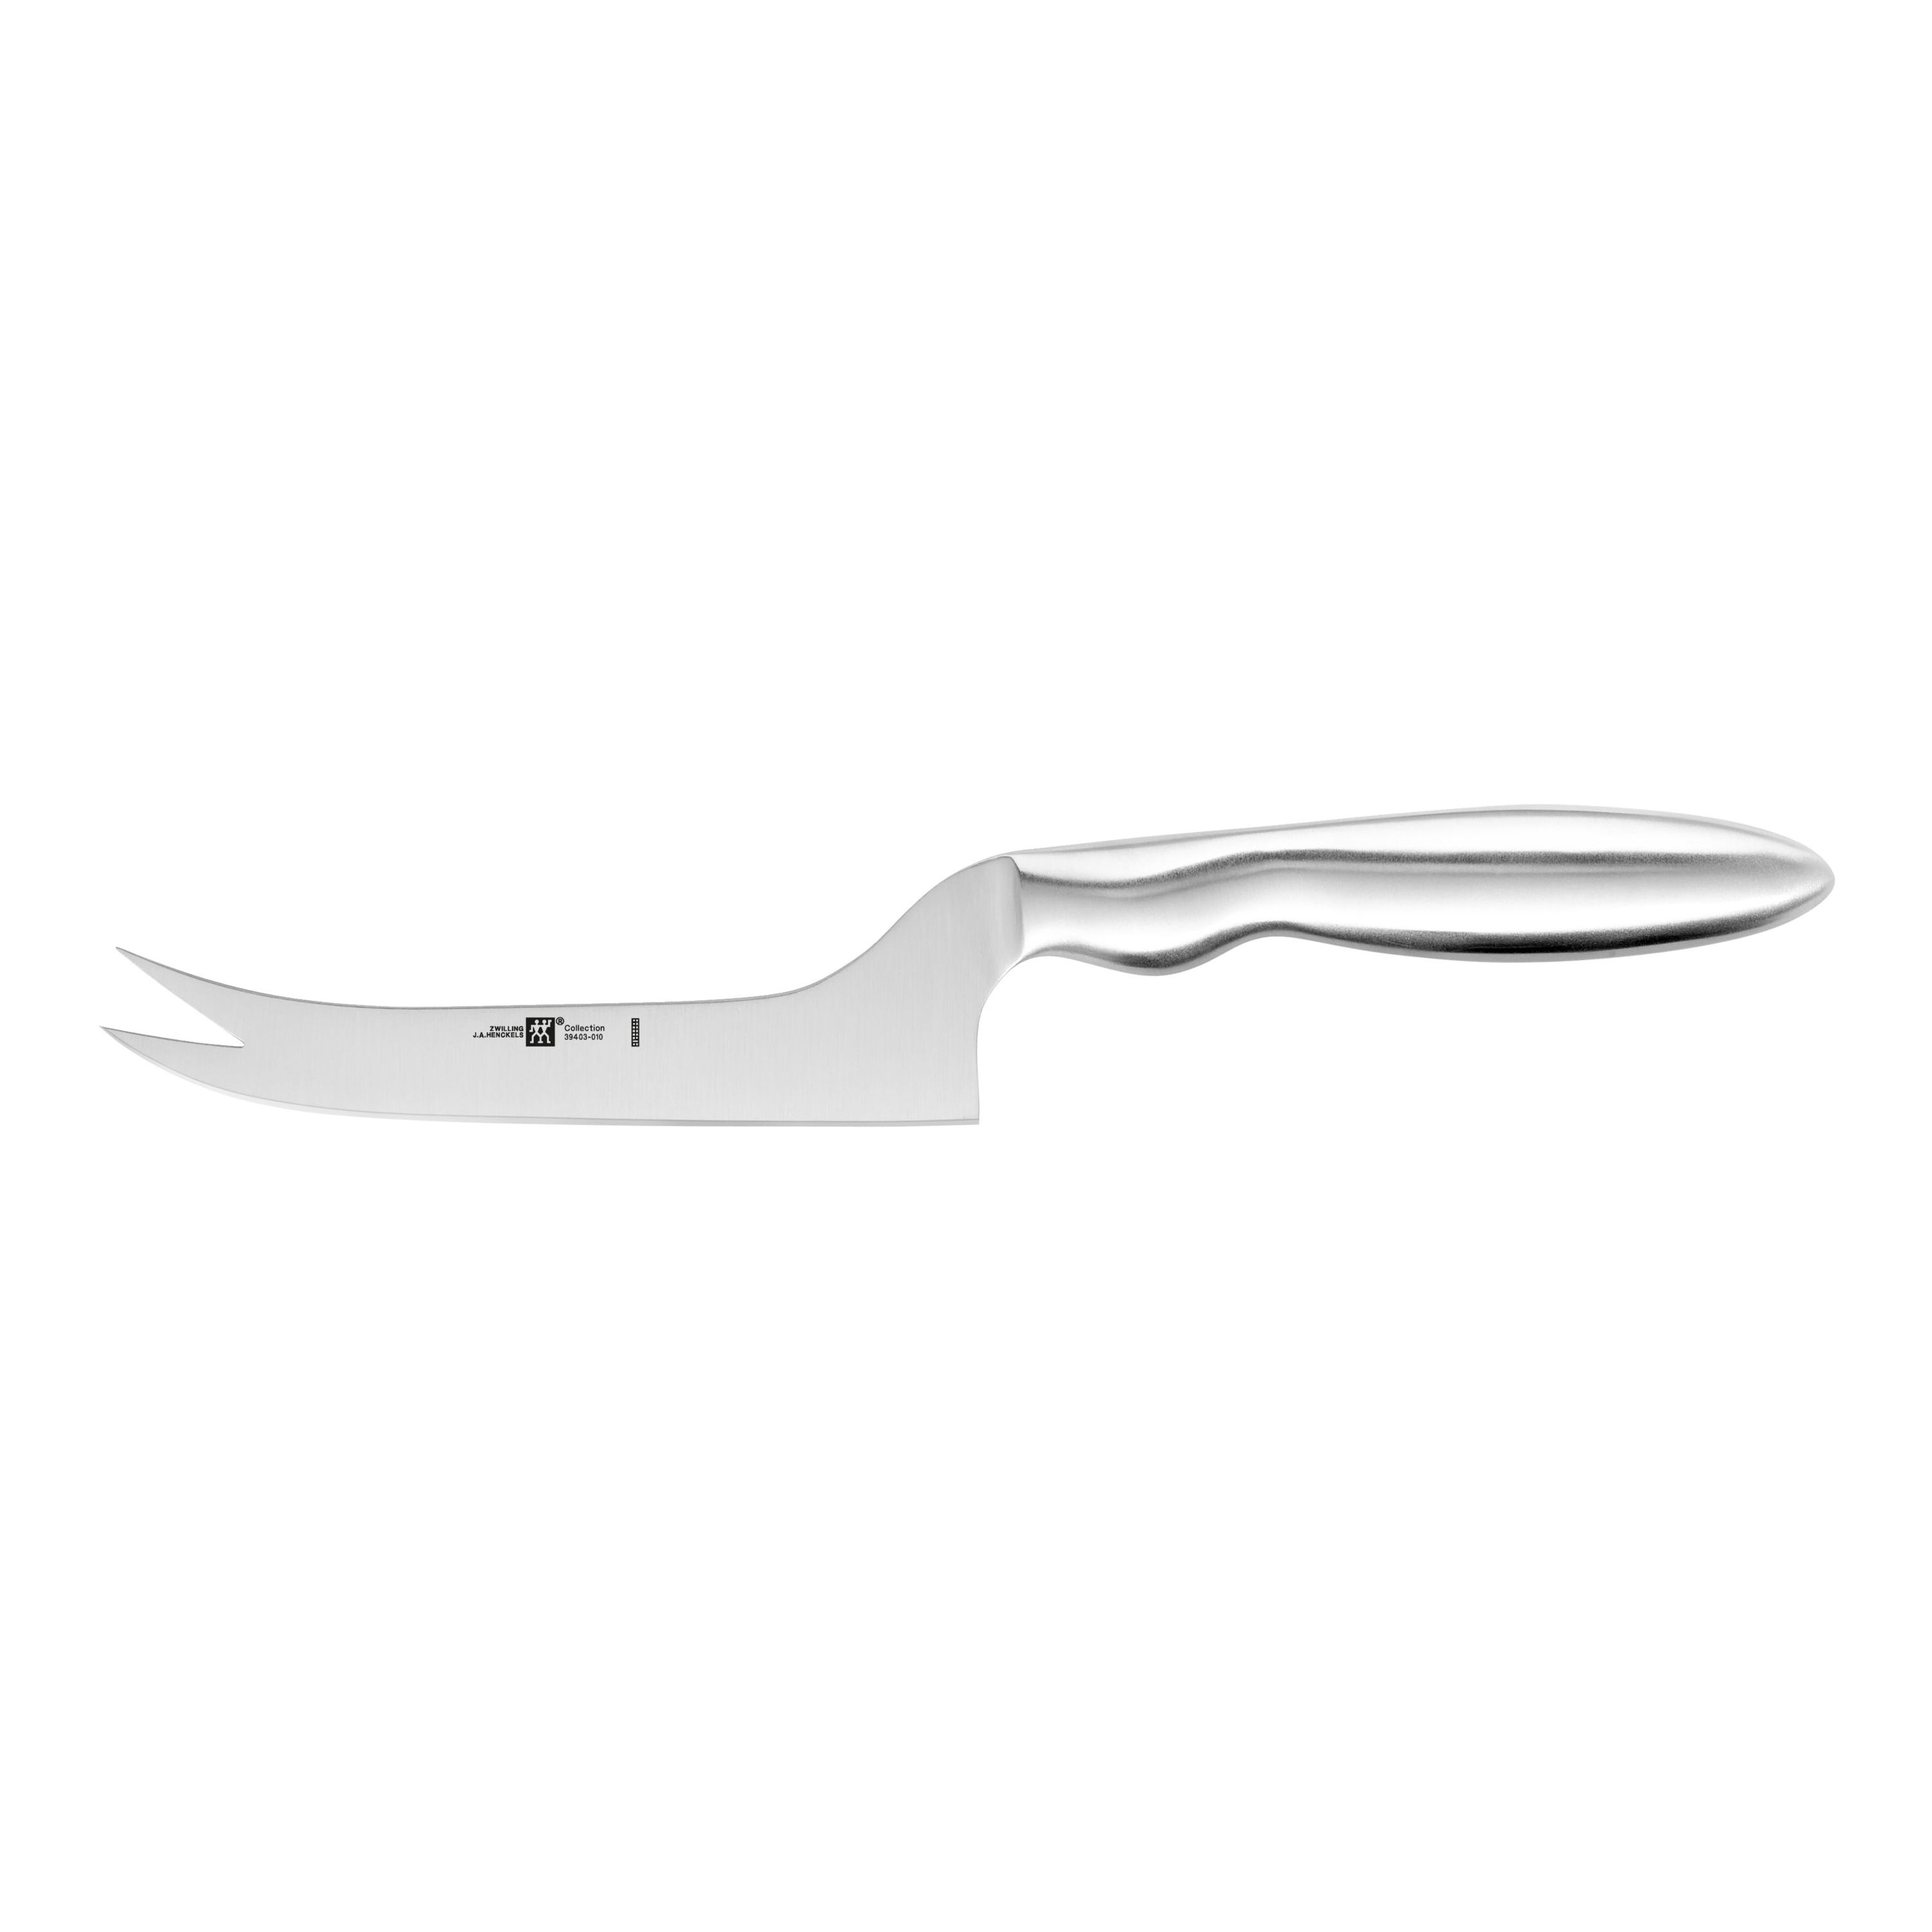 Zwilling J.A. Henckels 3-Piece Cheese Knife Set, Stainless Steel -  KnifeCenter - 39432-000